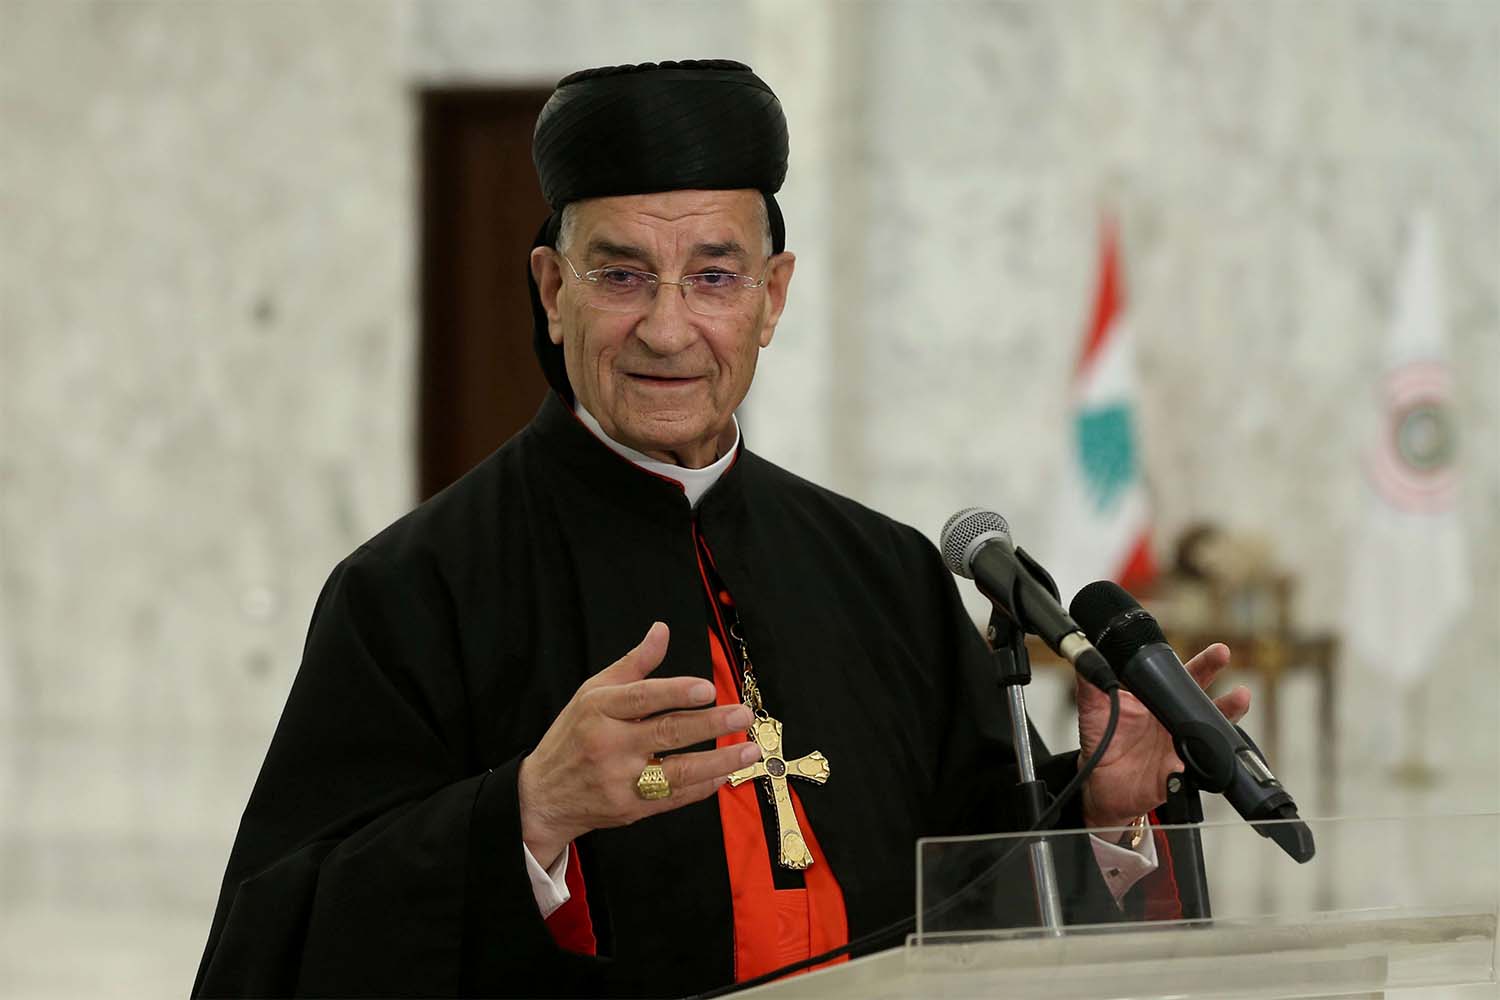 Patriarch Bechara said the Taif agreement did not hand specific ministries to specific sects